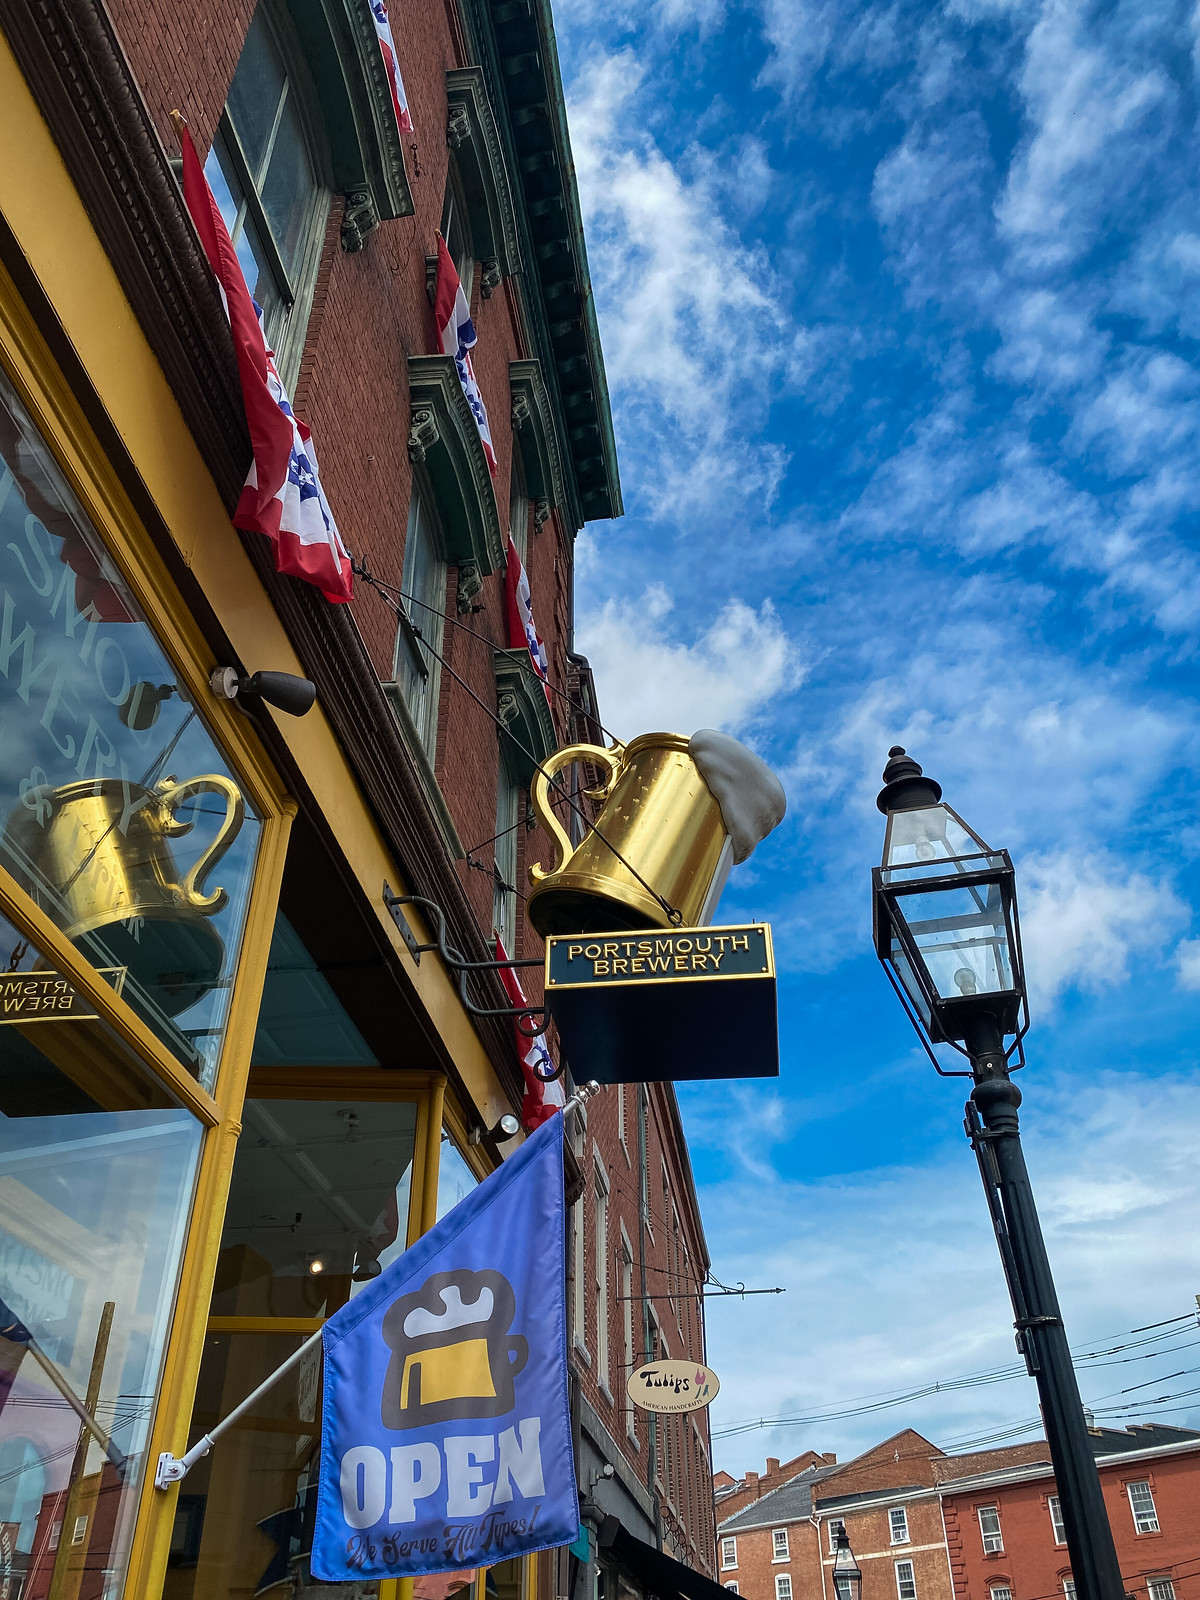 Portsmouth Brewery | Best Portsmouth Restaurants | Where to eat in Portsmouth, NH | Portsmouth New Hampshire Travel Guide | Weekend in New England | Things to do in Portsmouth